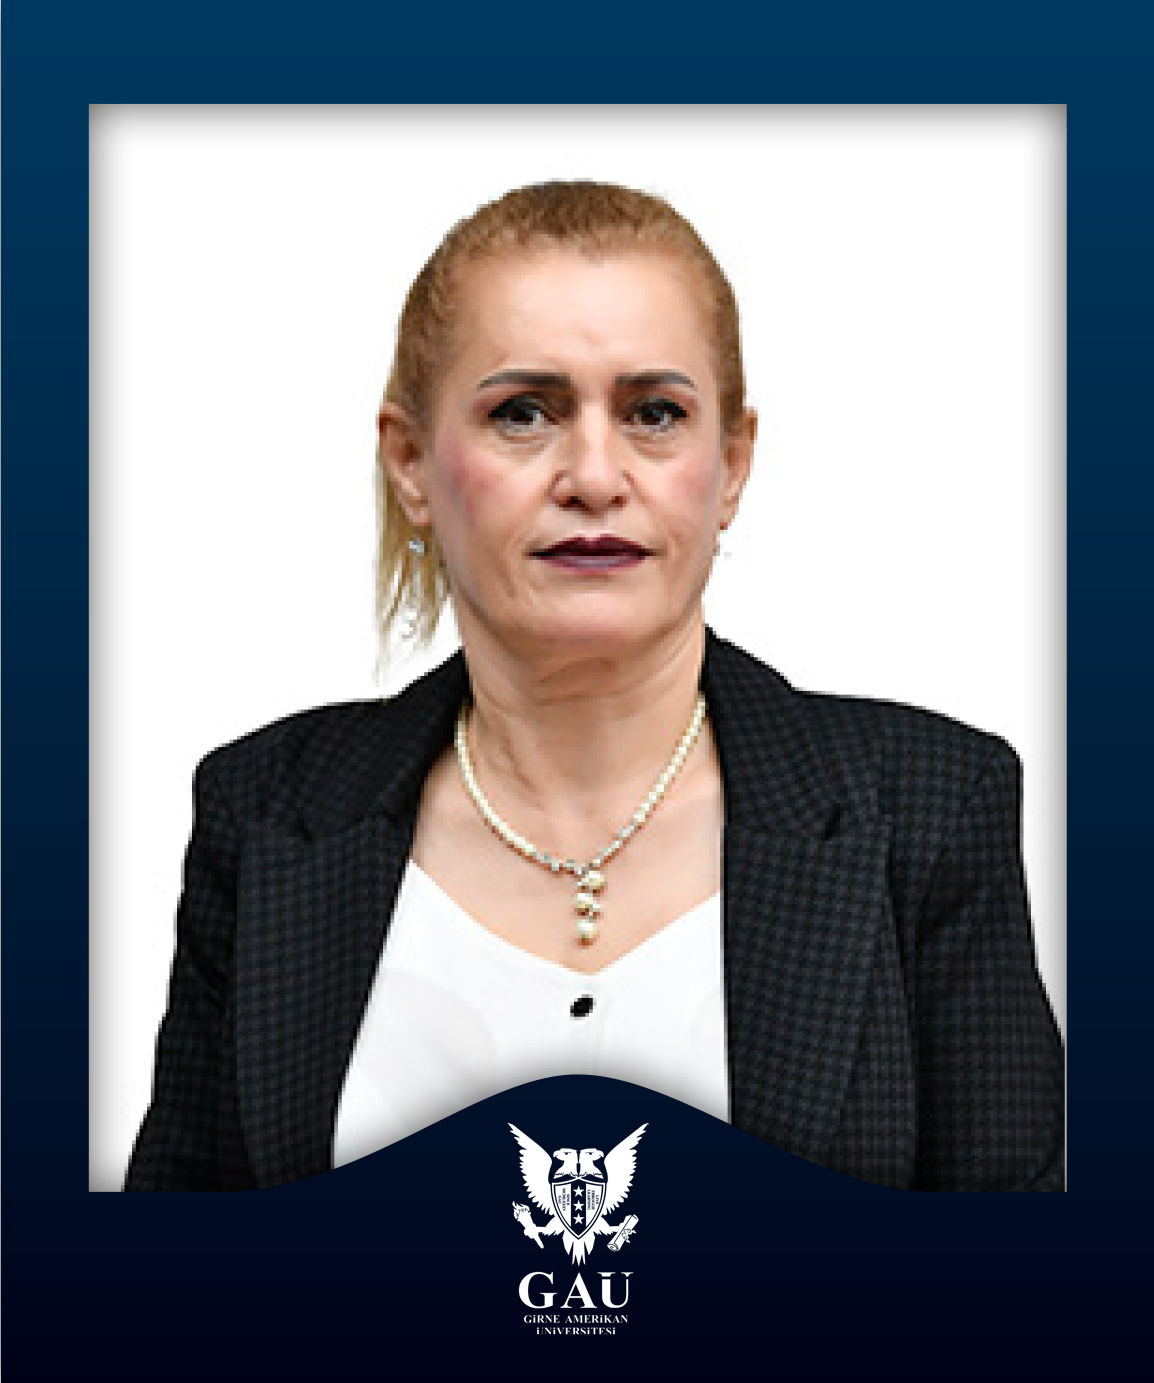 Yrd. Doç. Dr. Tahereh Arefipour